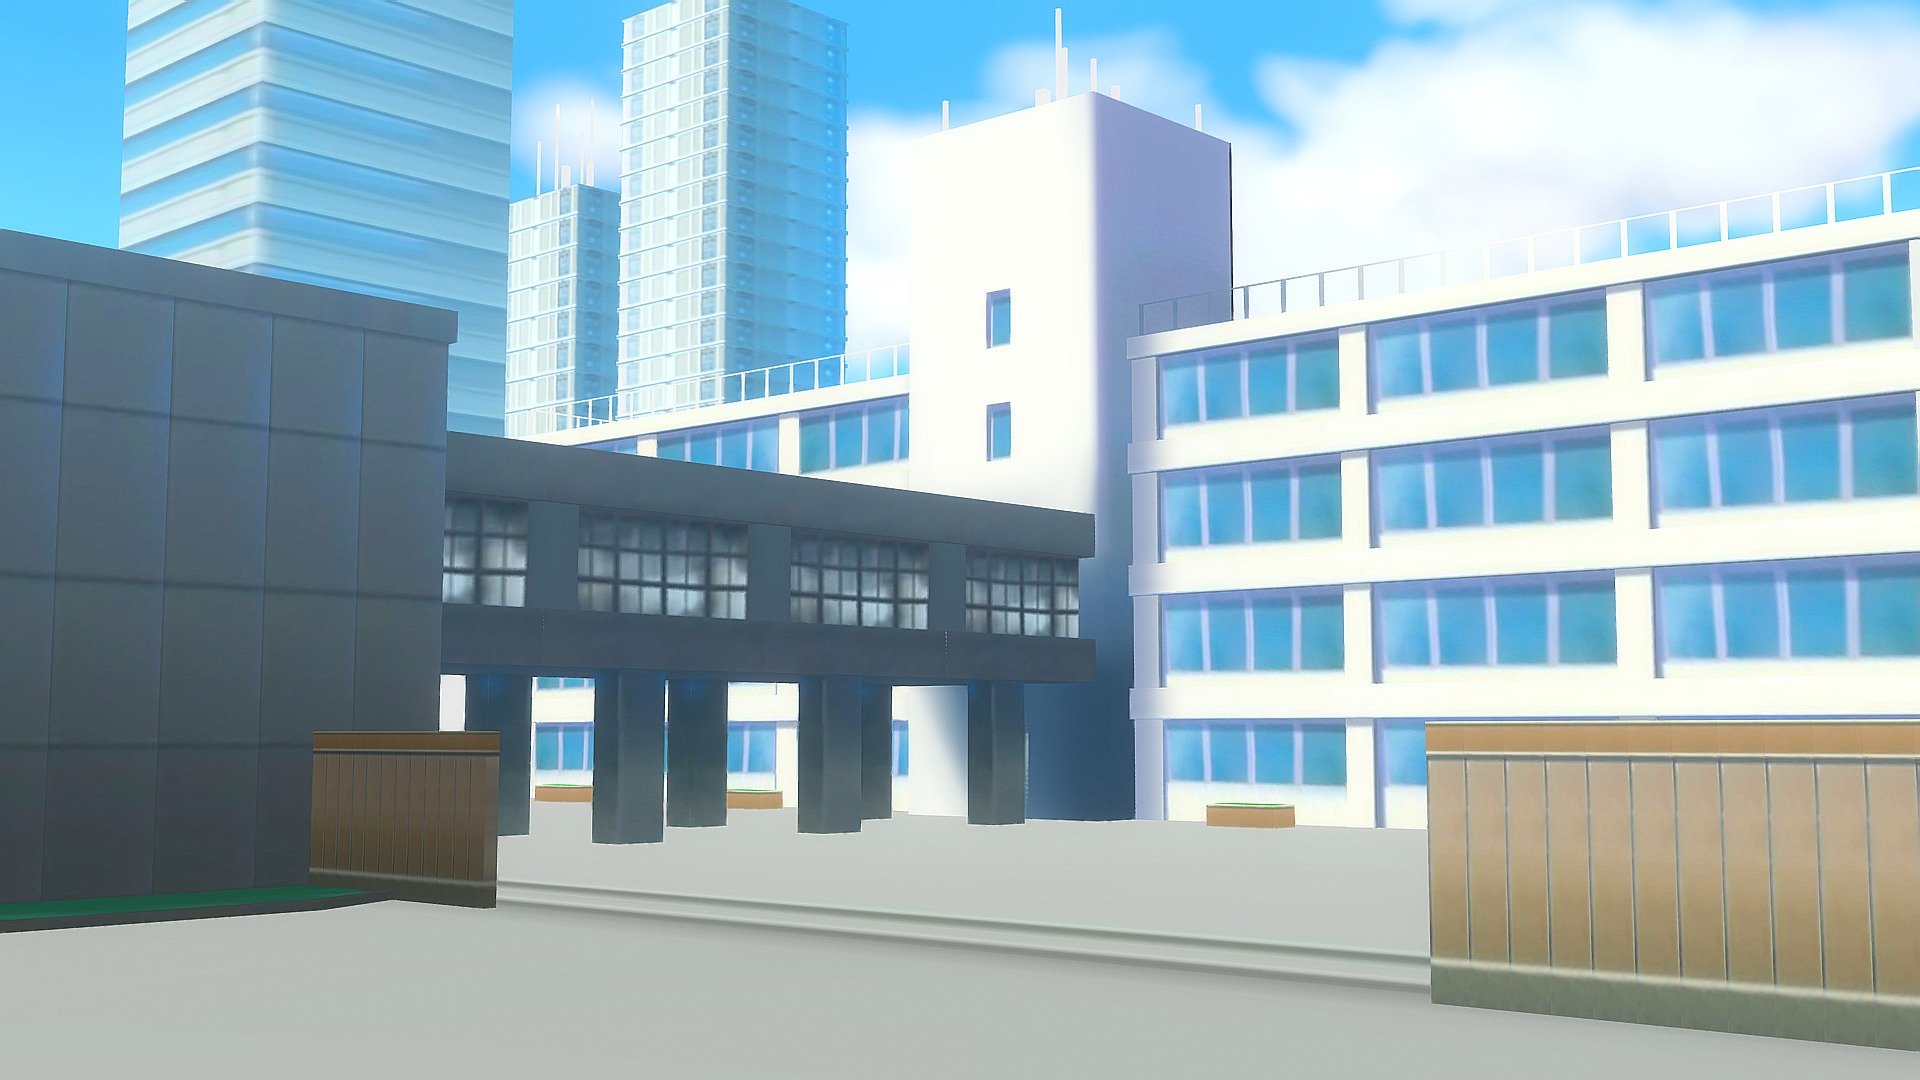 School Anime - Download Free 3D model by AnixMoonLight (@ani111) [e110fb9]